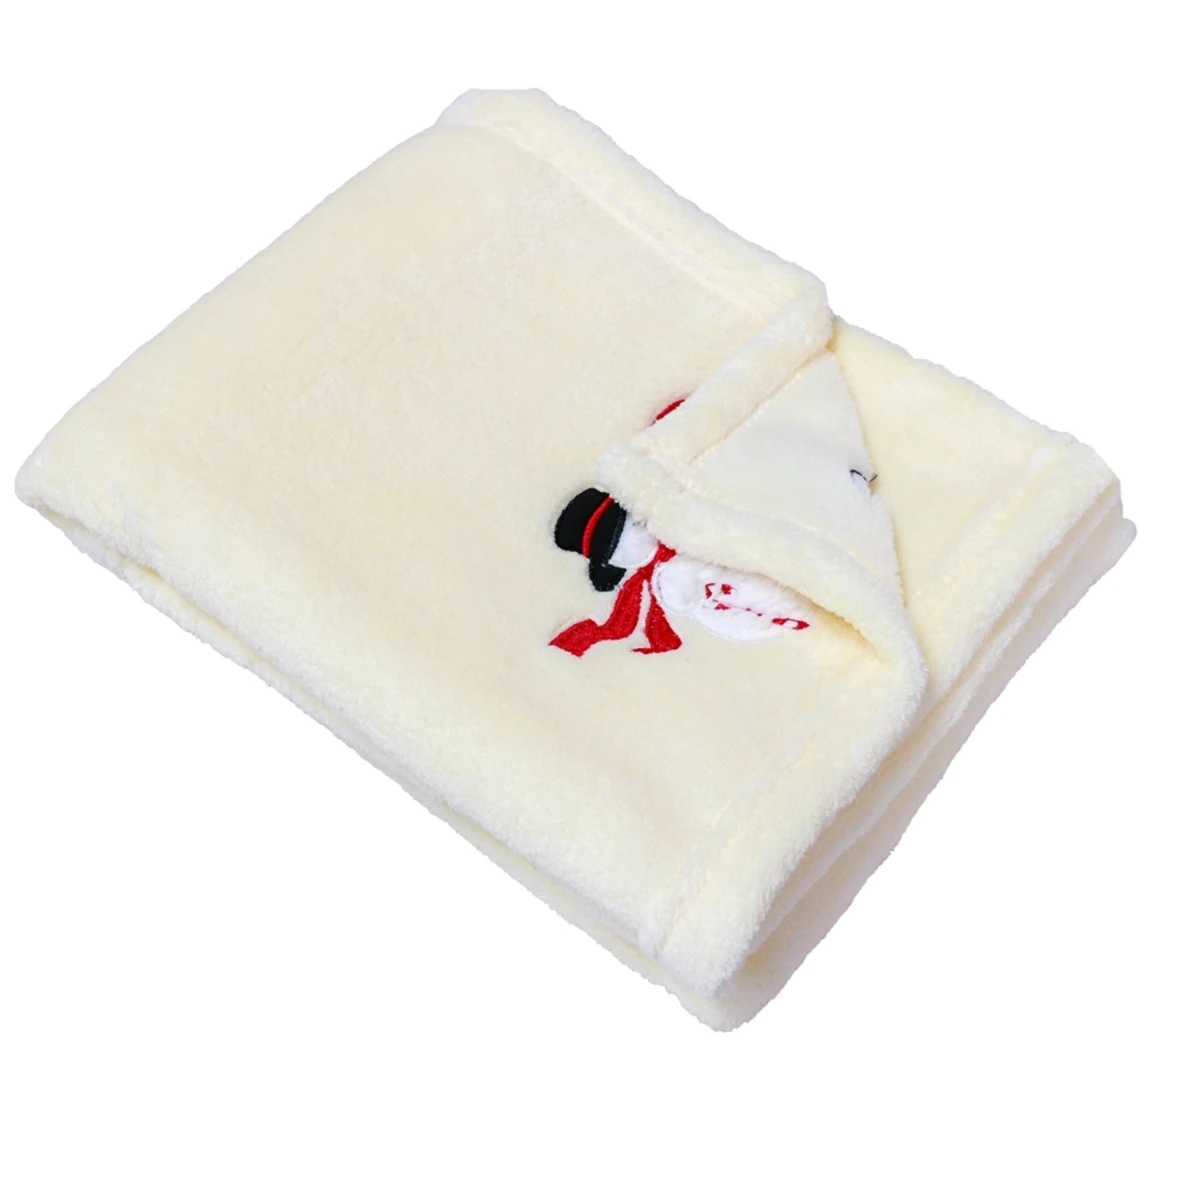 Snowman and Santa Embroidery Flannel Baby Blanket (Cream)